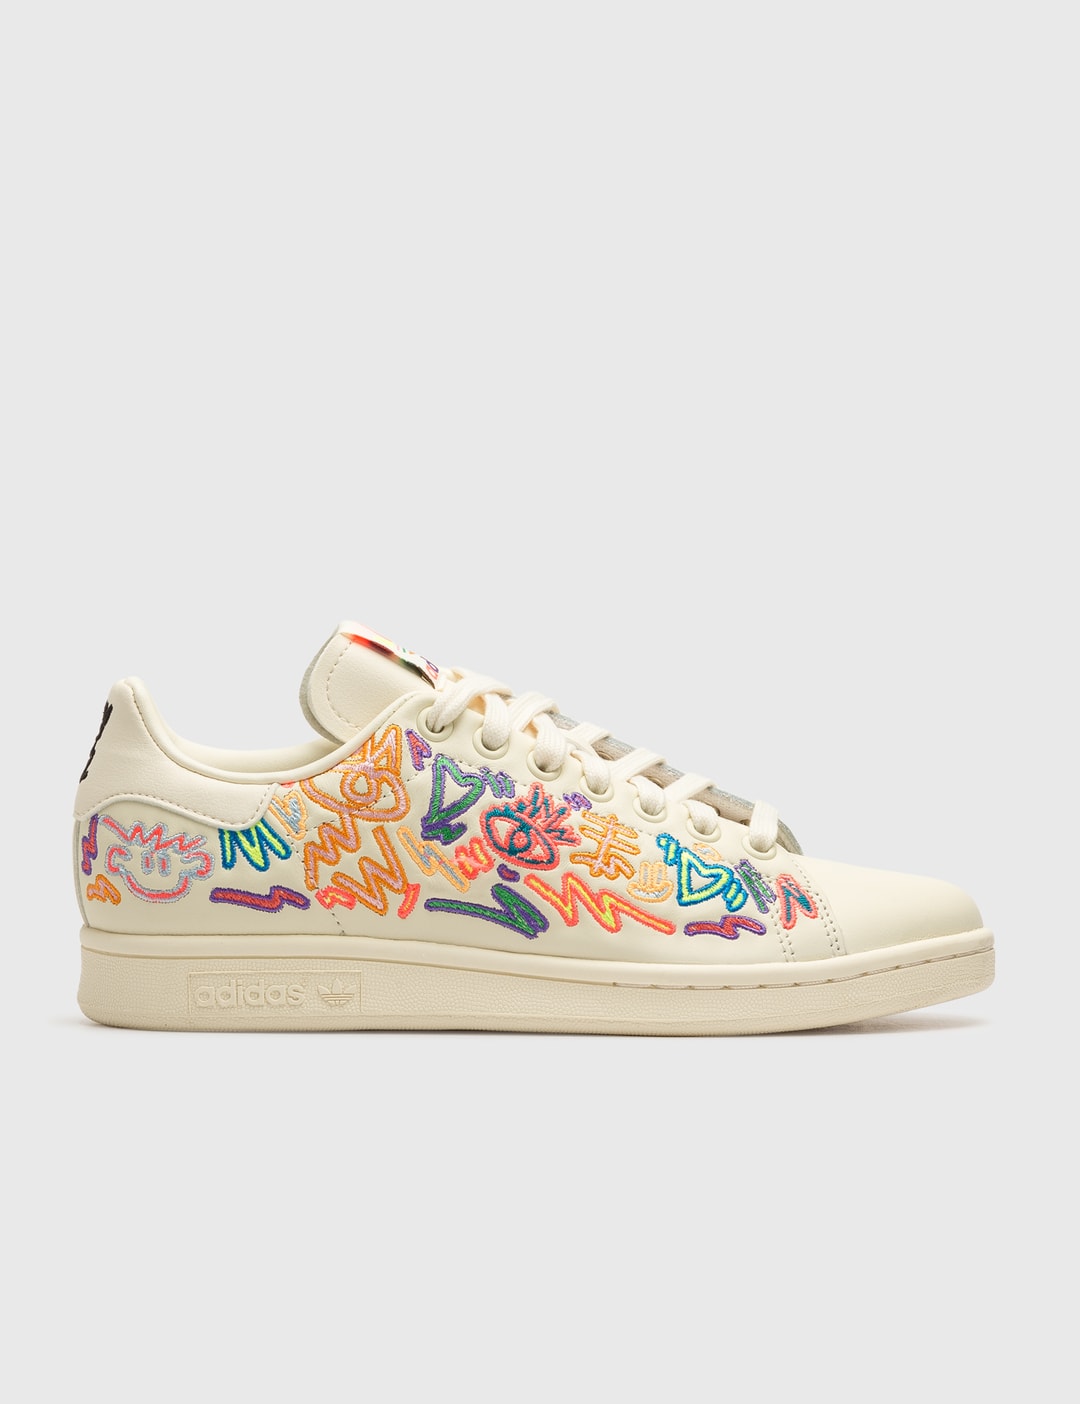 boycot diepvries Miljard Adidas Originals - Stan Smith Pride Sneakers | HBX - Globally Curated  Fashion and Lifestyle by Hypebeast